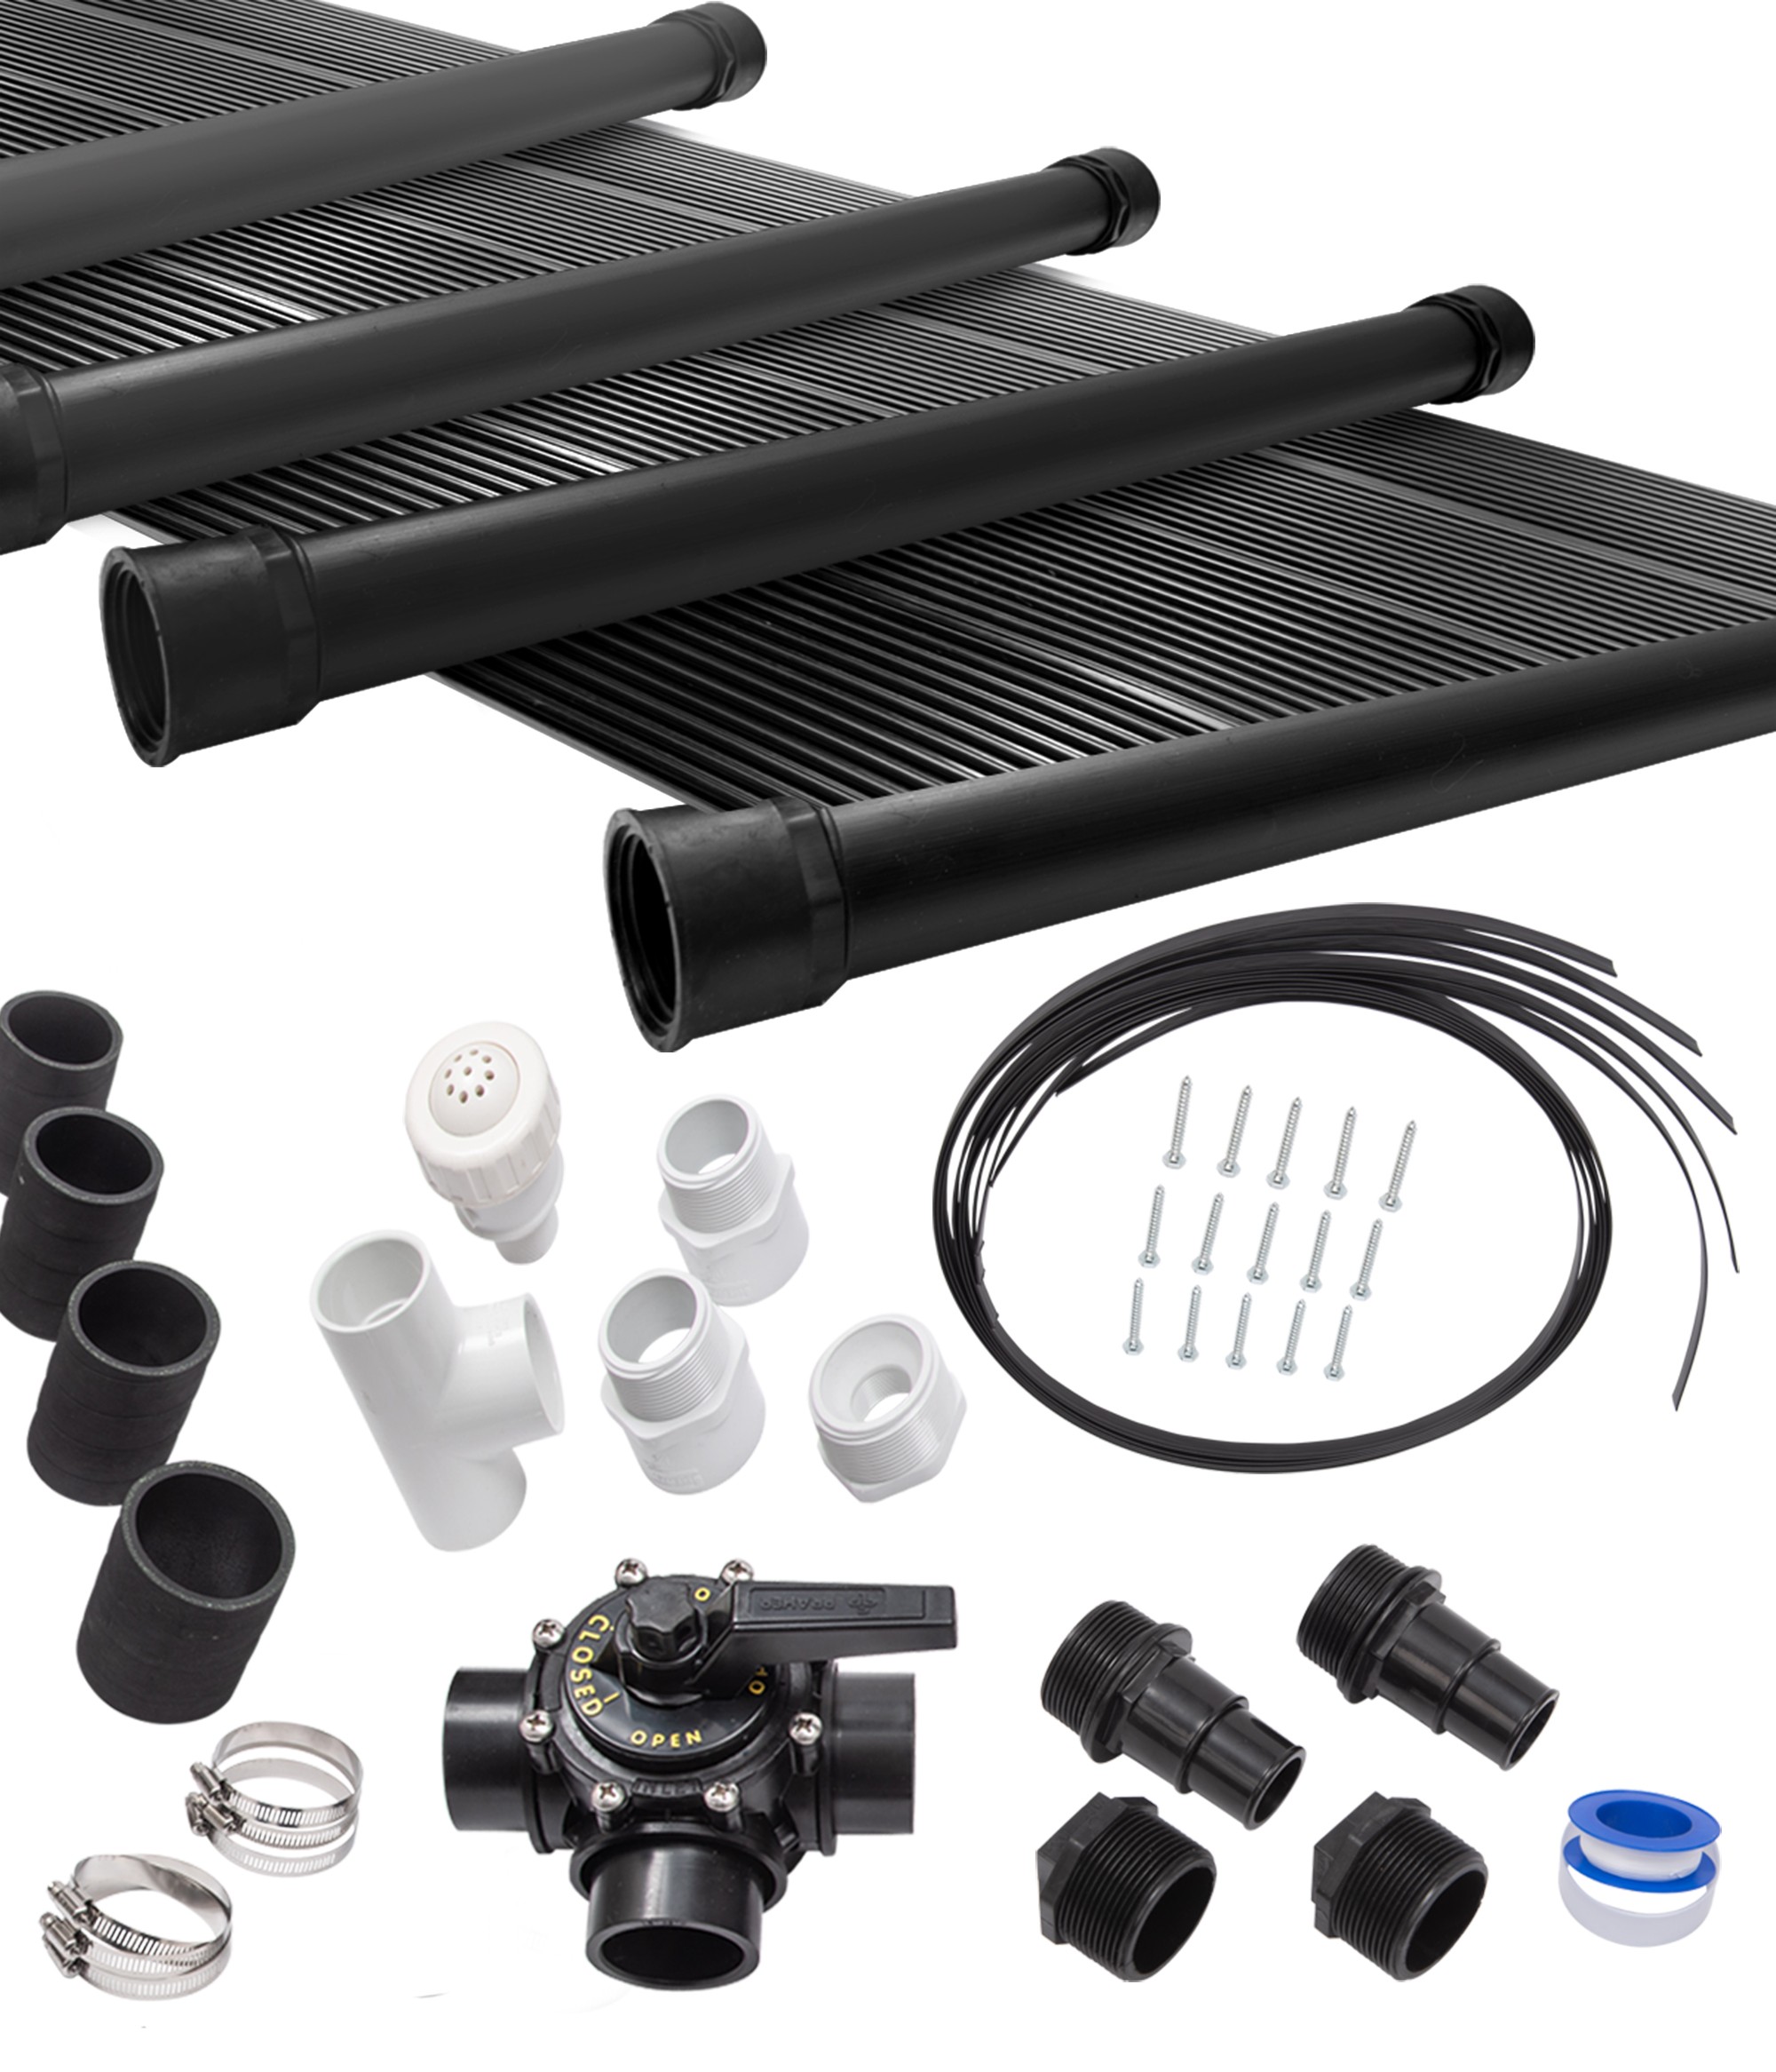 18-2X12' SunQuest Solar Swimming Pool Heater Complete System with Roof Kits